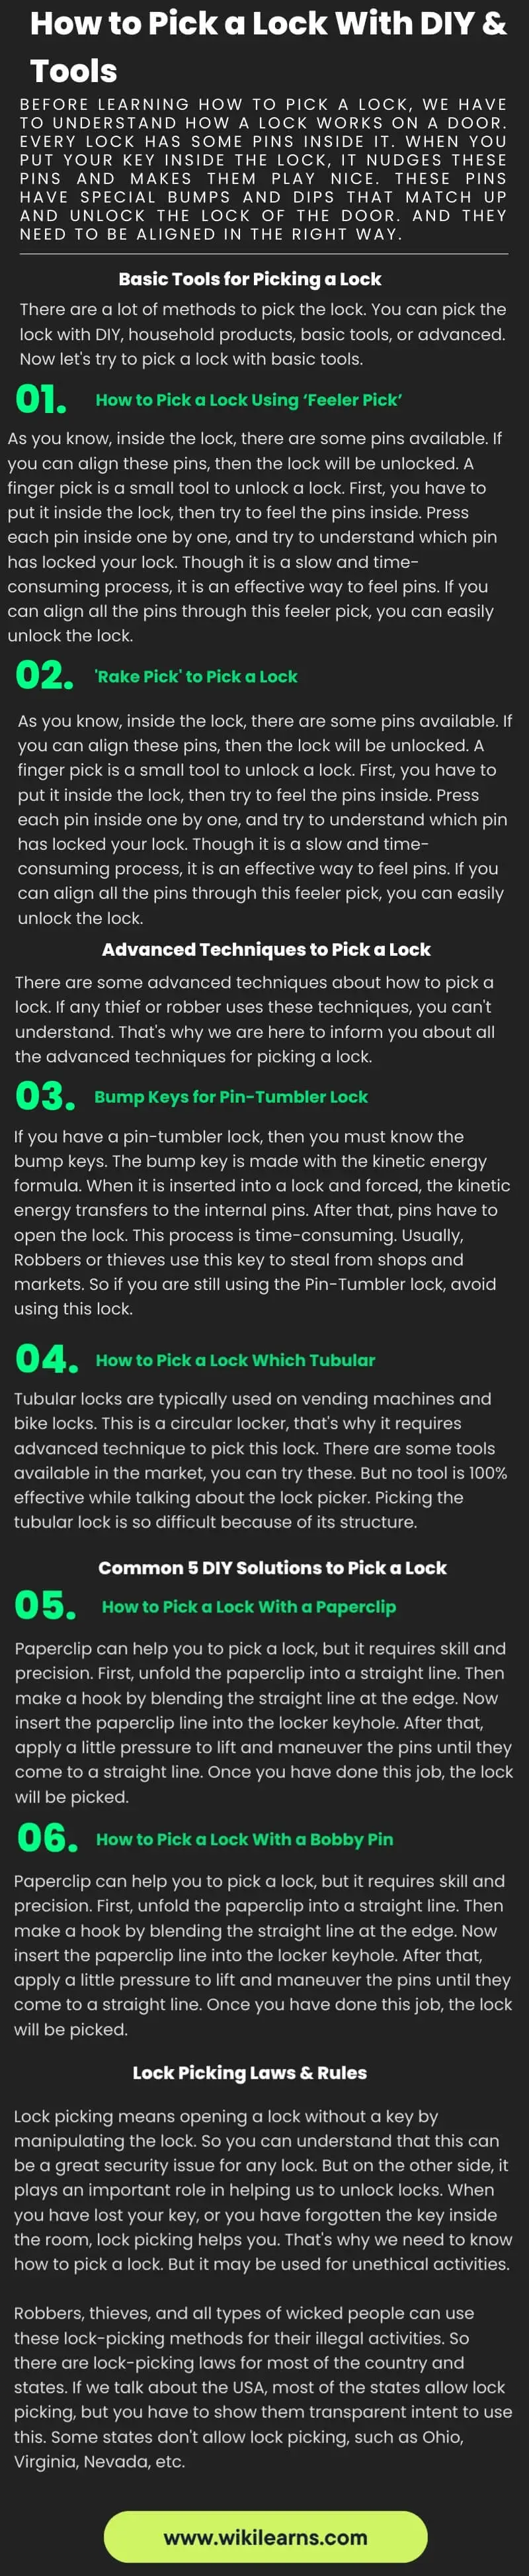 How to Pick a Lock, Infographic, Wiki learns